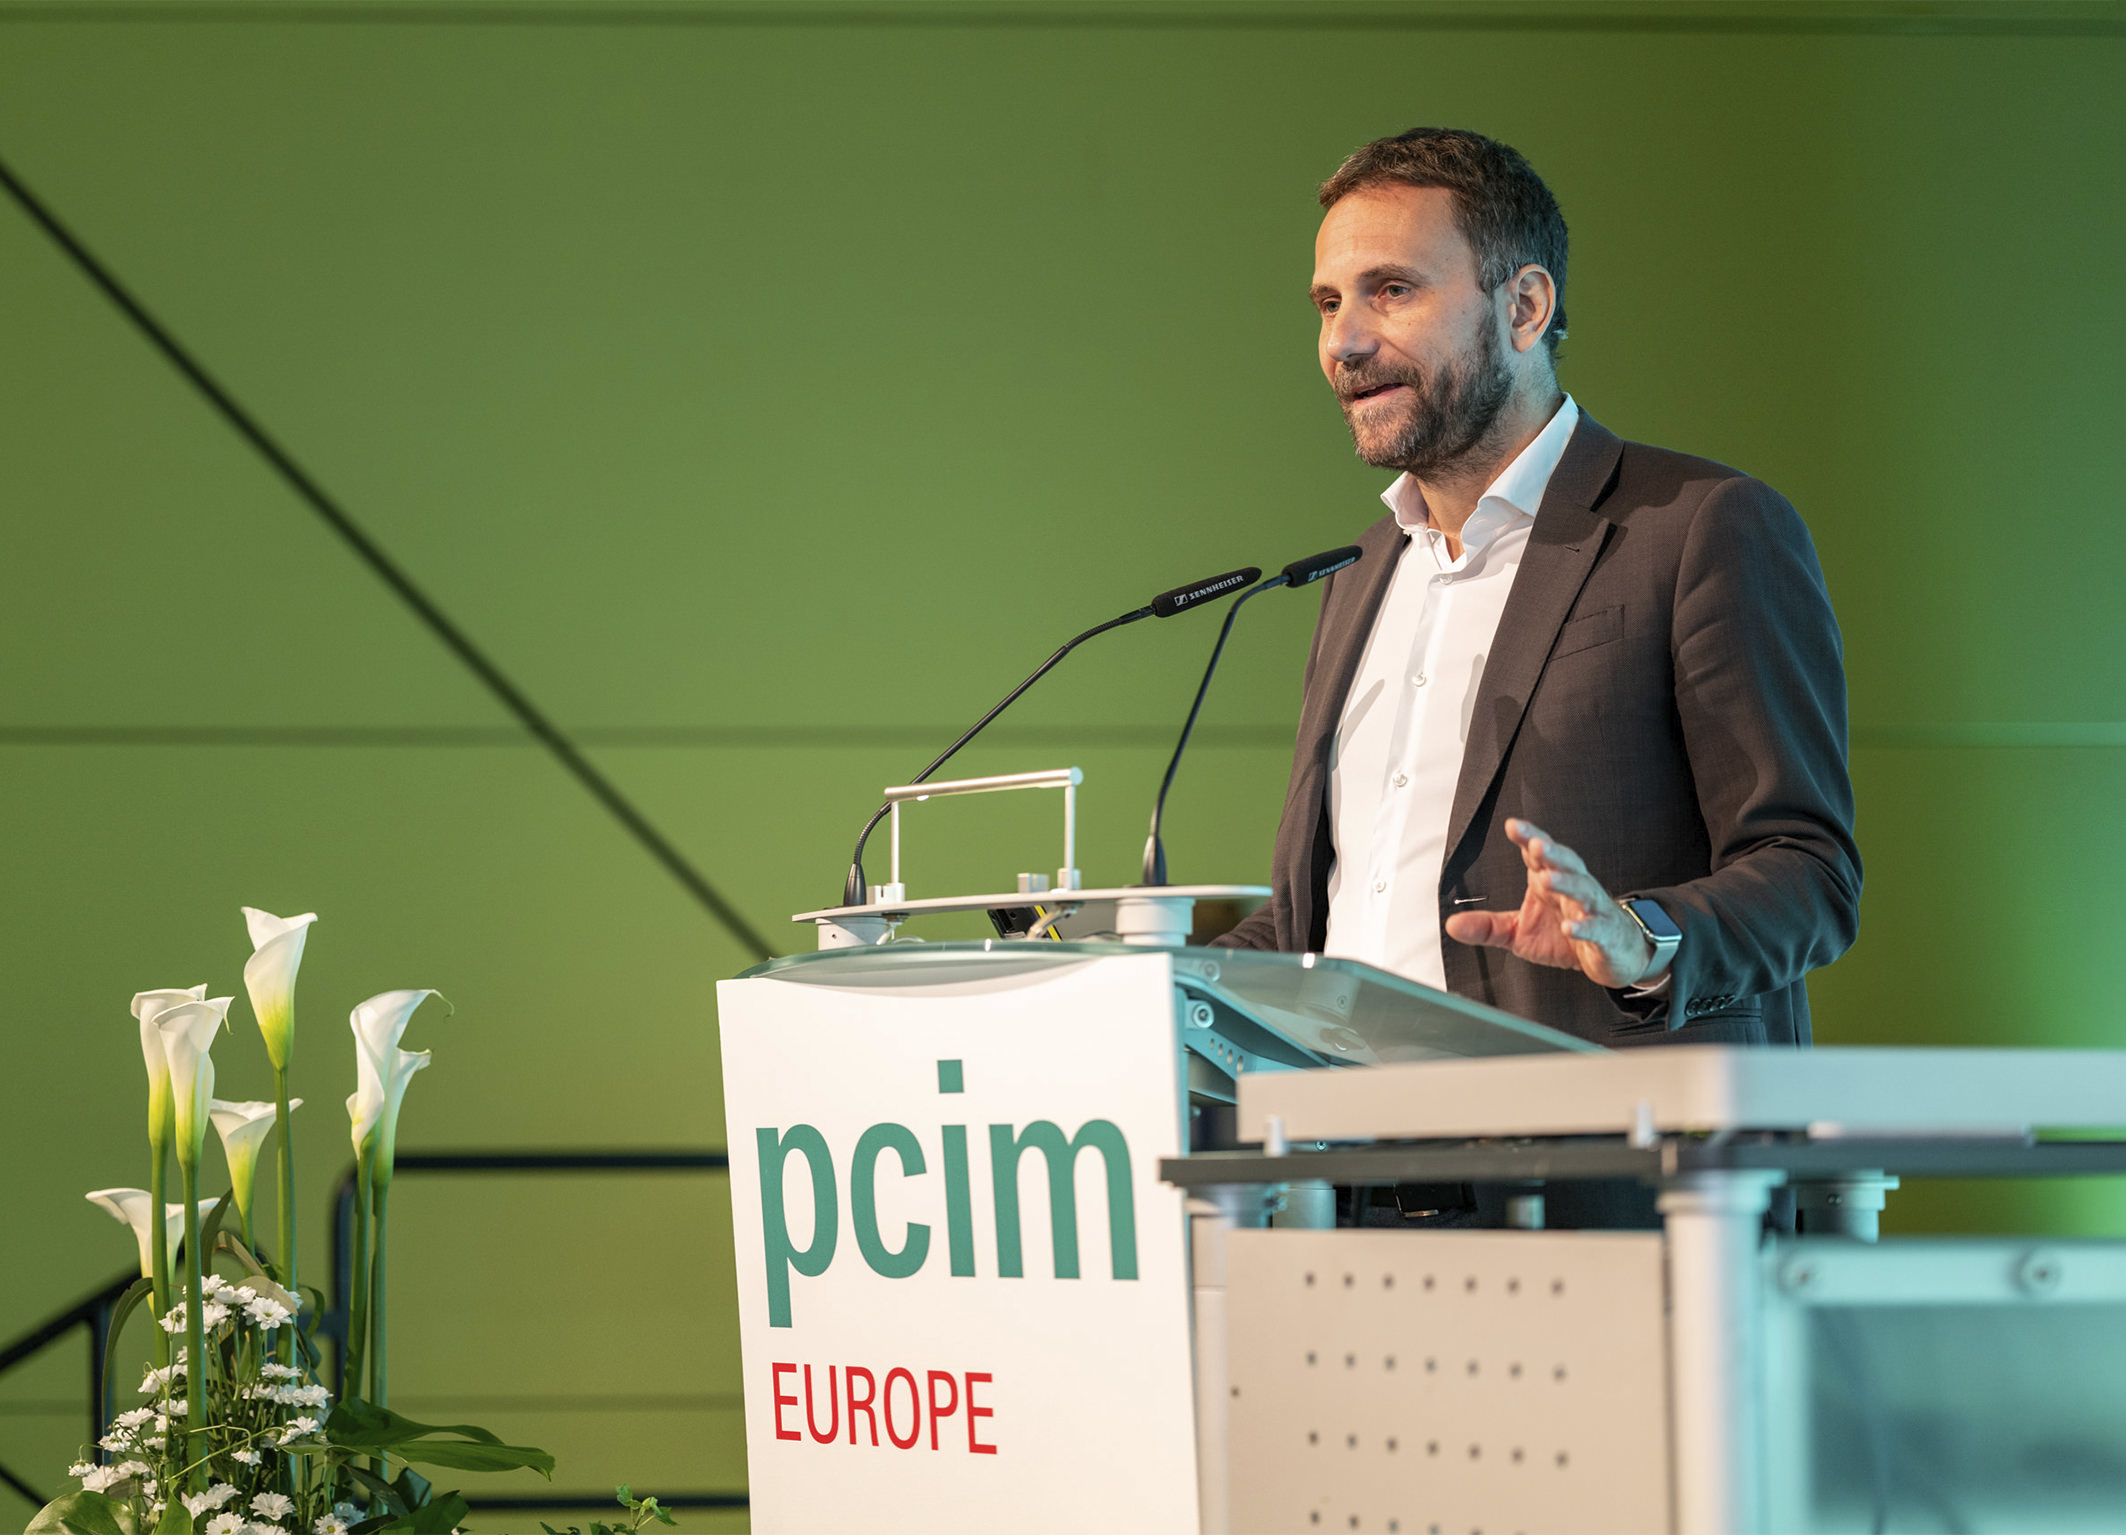 Conference PCIM Europe 2022